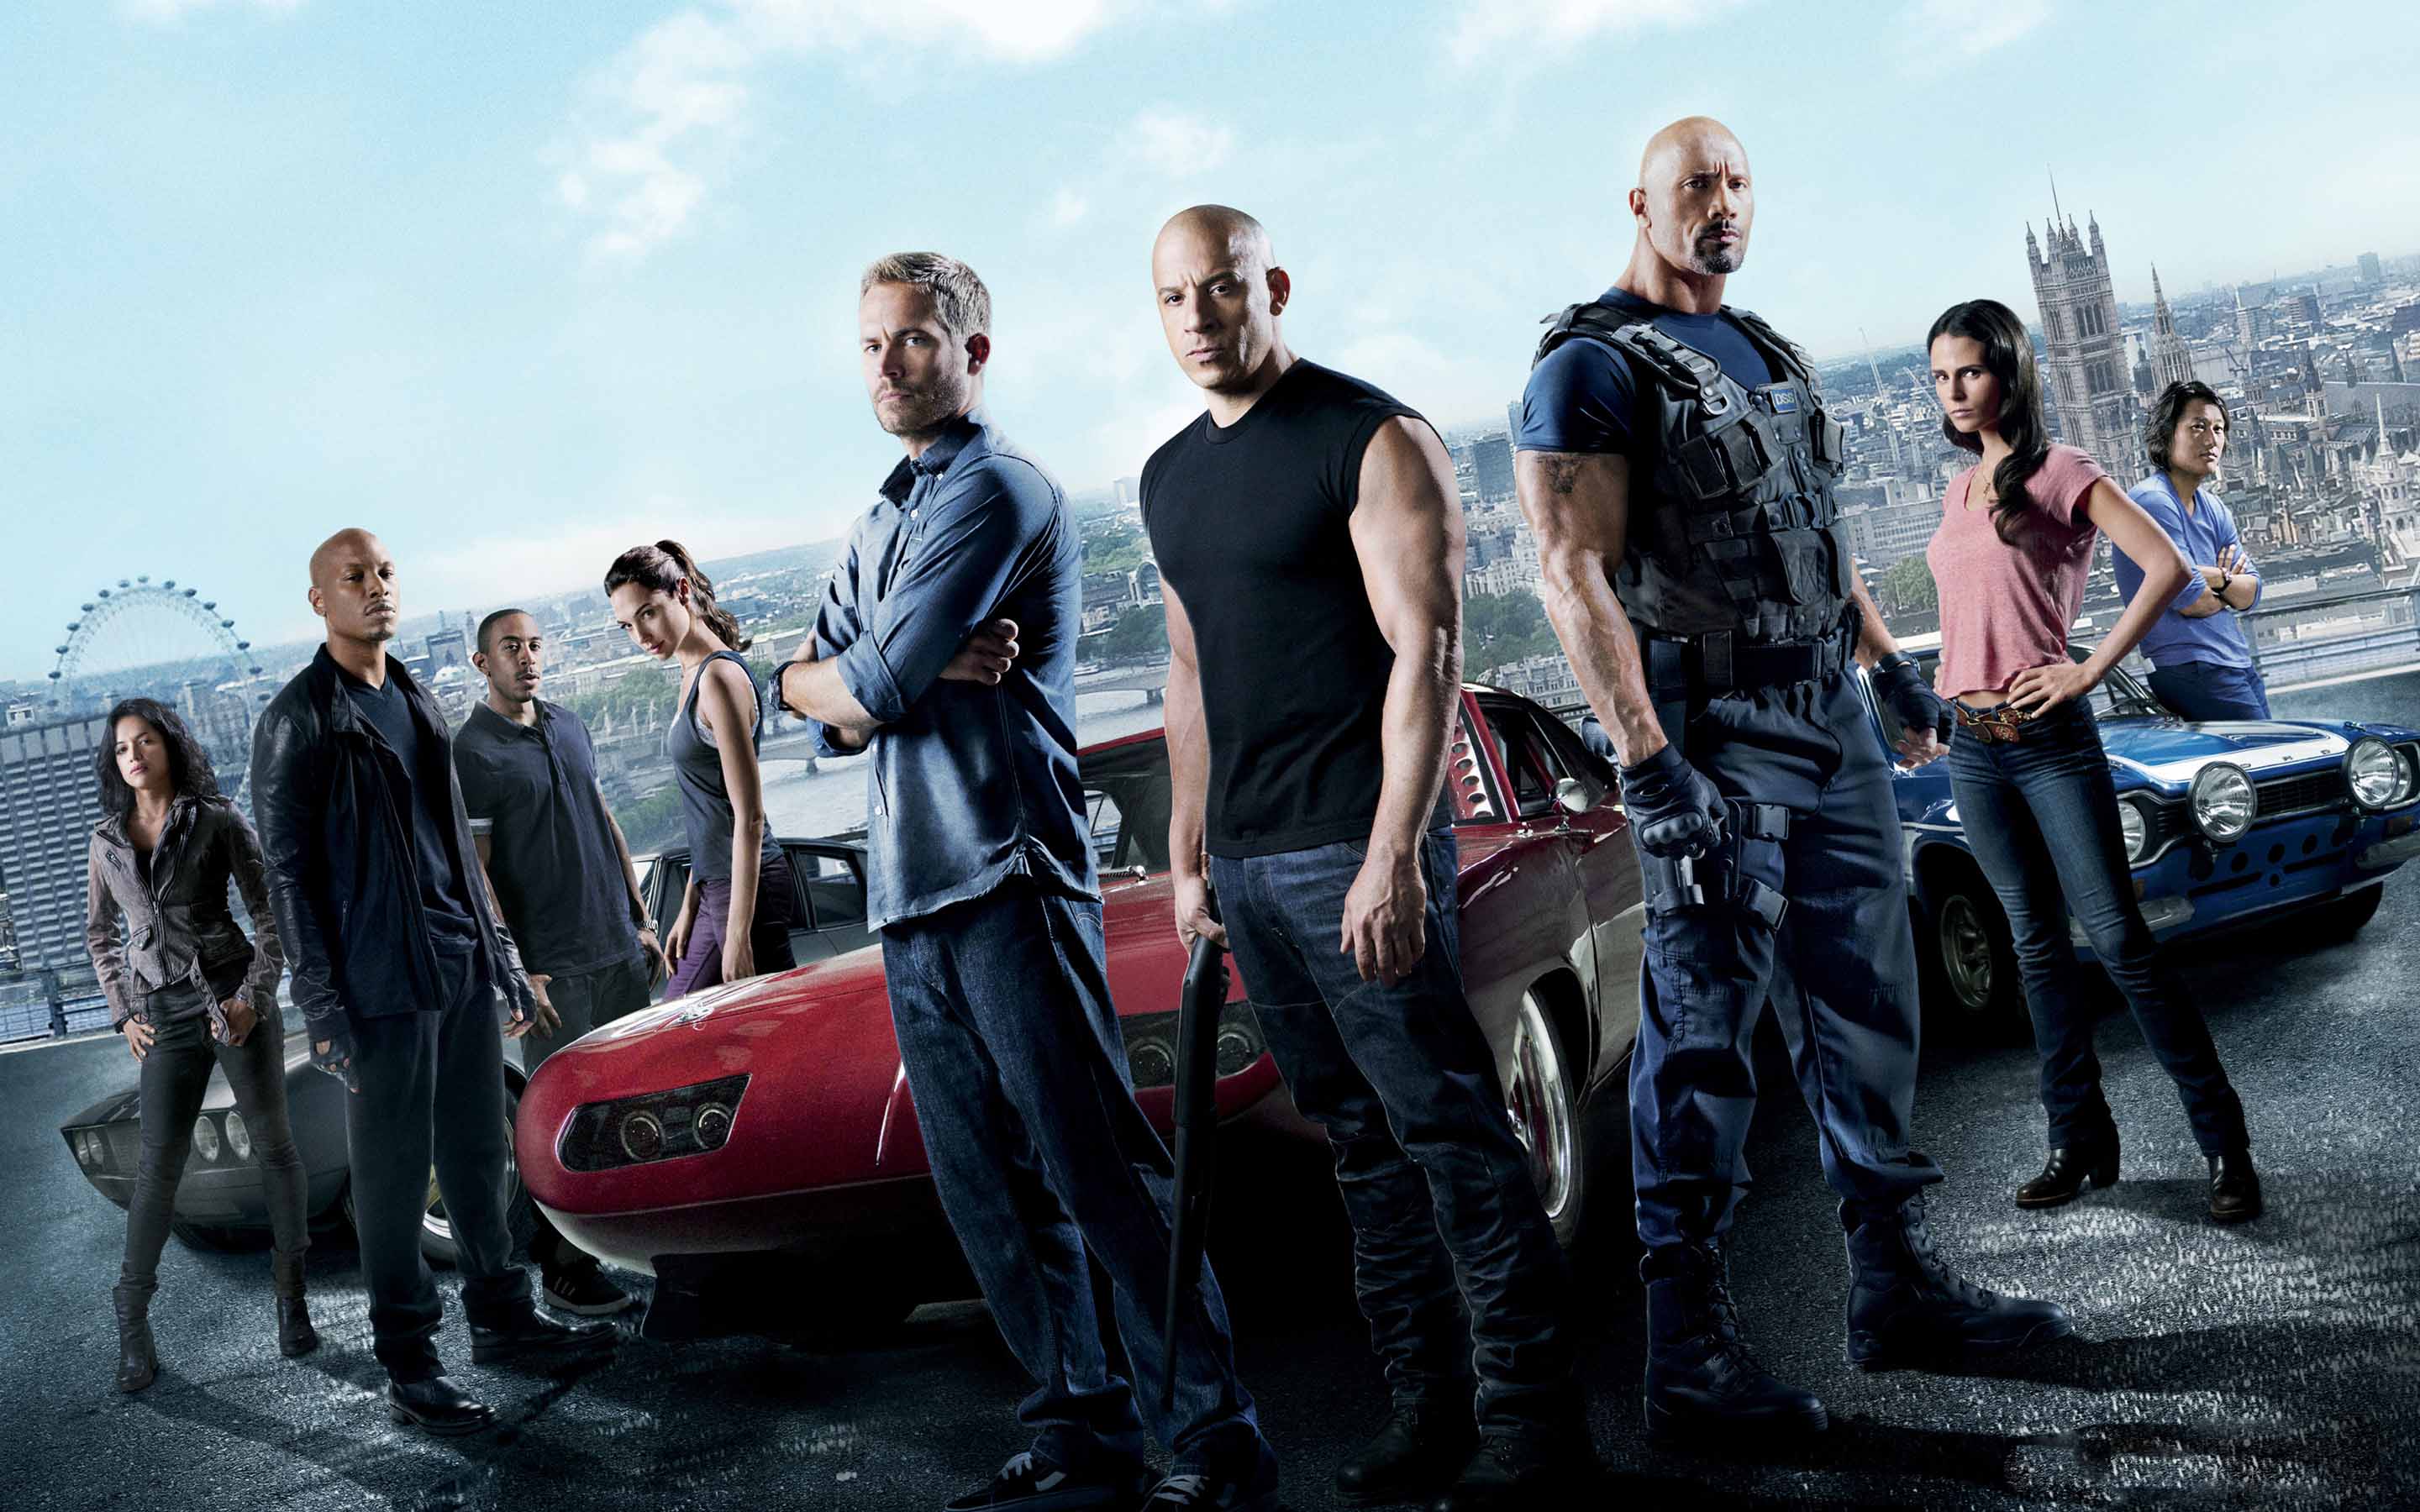 Hollywood Movies fast and furious 6 wallpaper new download hd